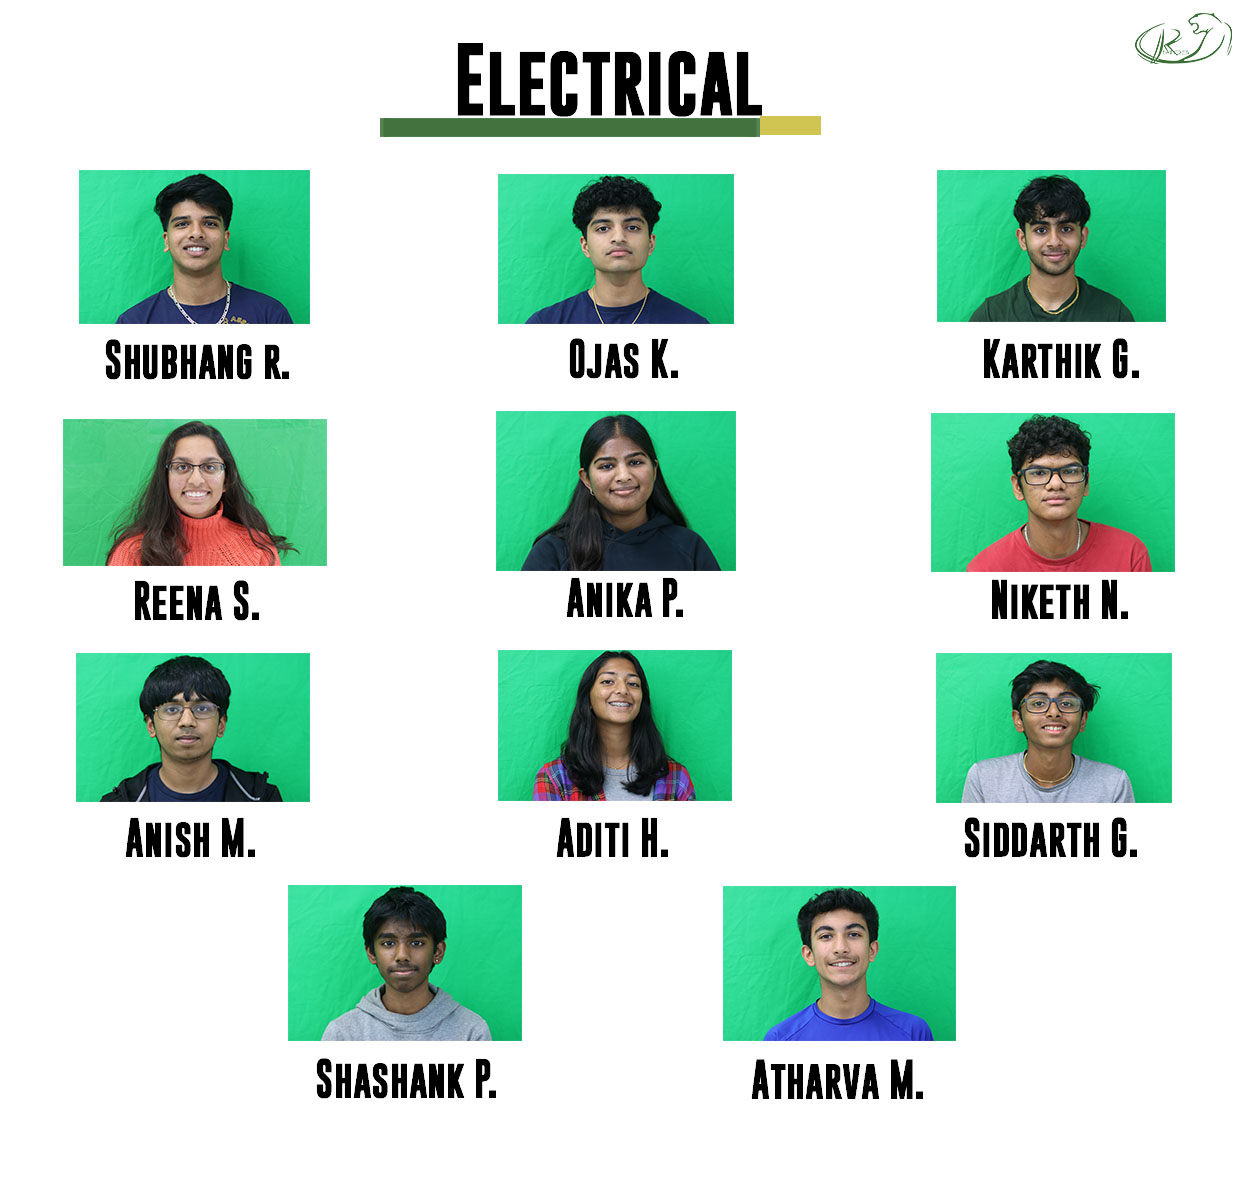 Electrical-Photoboard-23-24